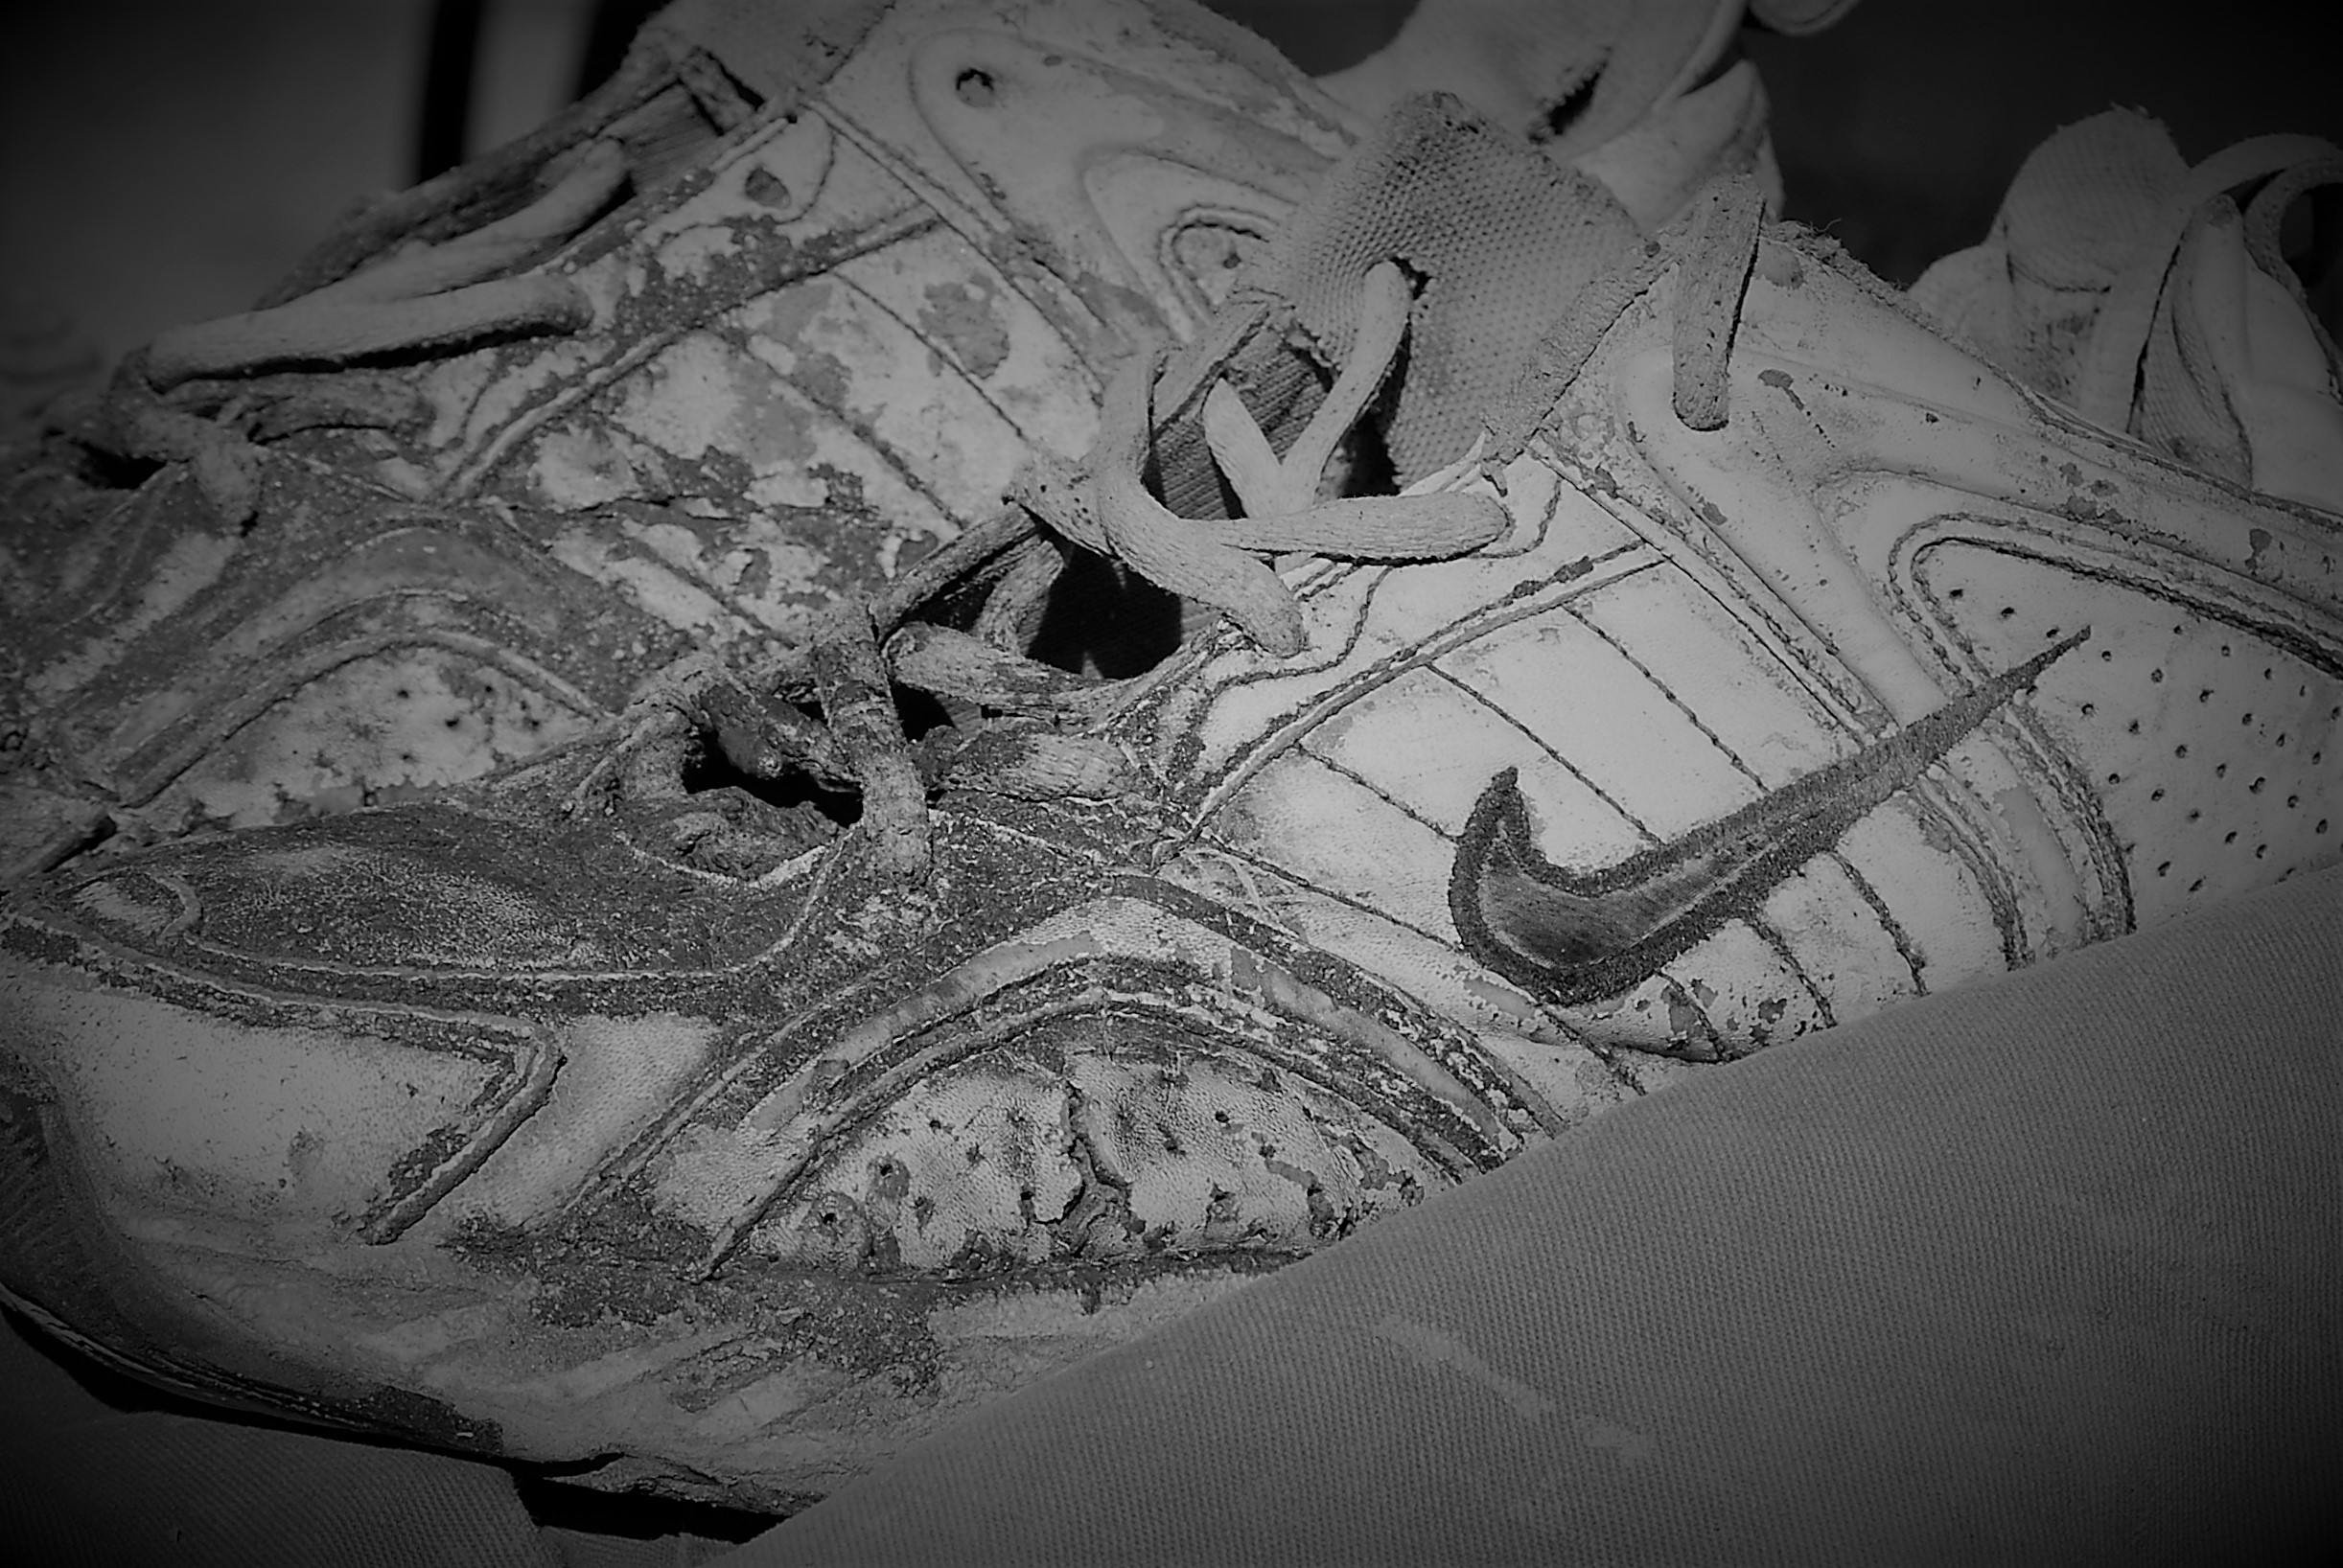 Free stock photo of Old Shoes Black White Worn Nike Running Shoes